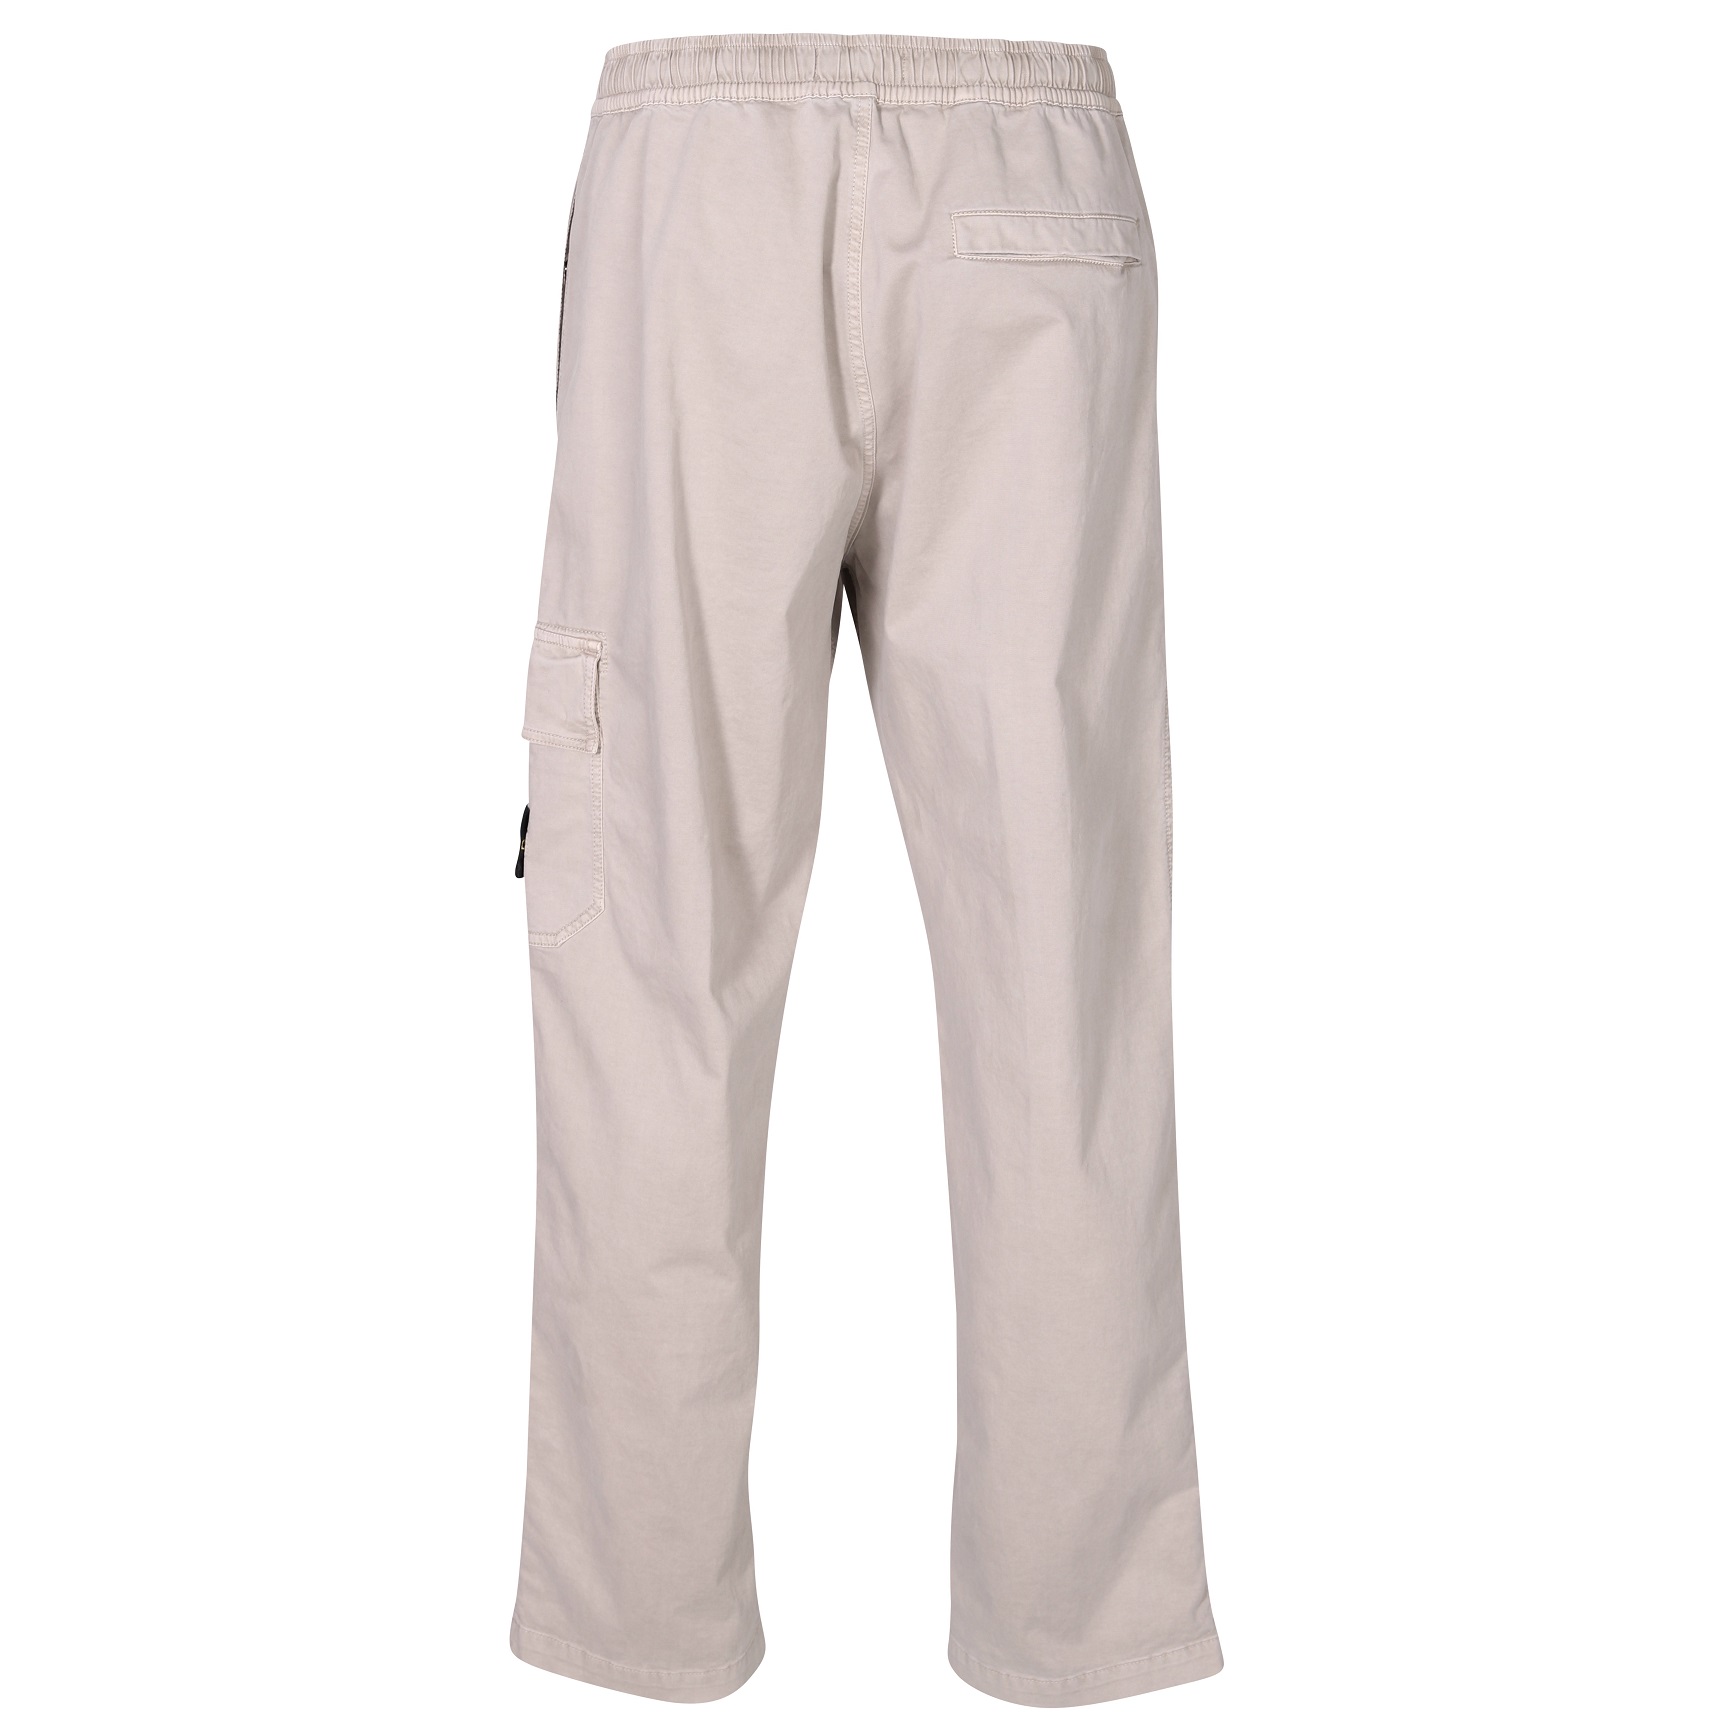 STONE ISLAND Loose Cargo Pant in Washed Dove Grey 34